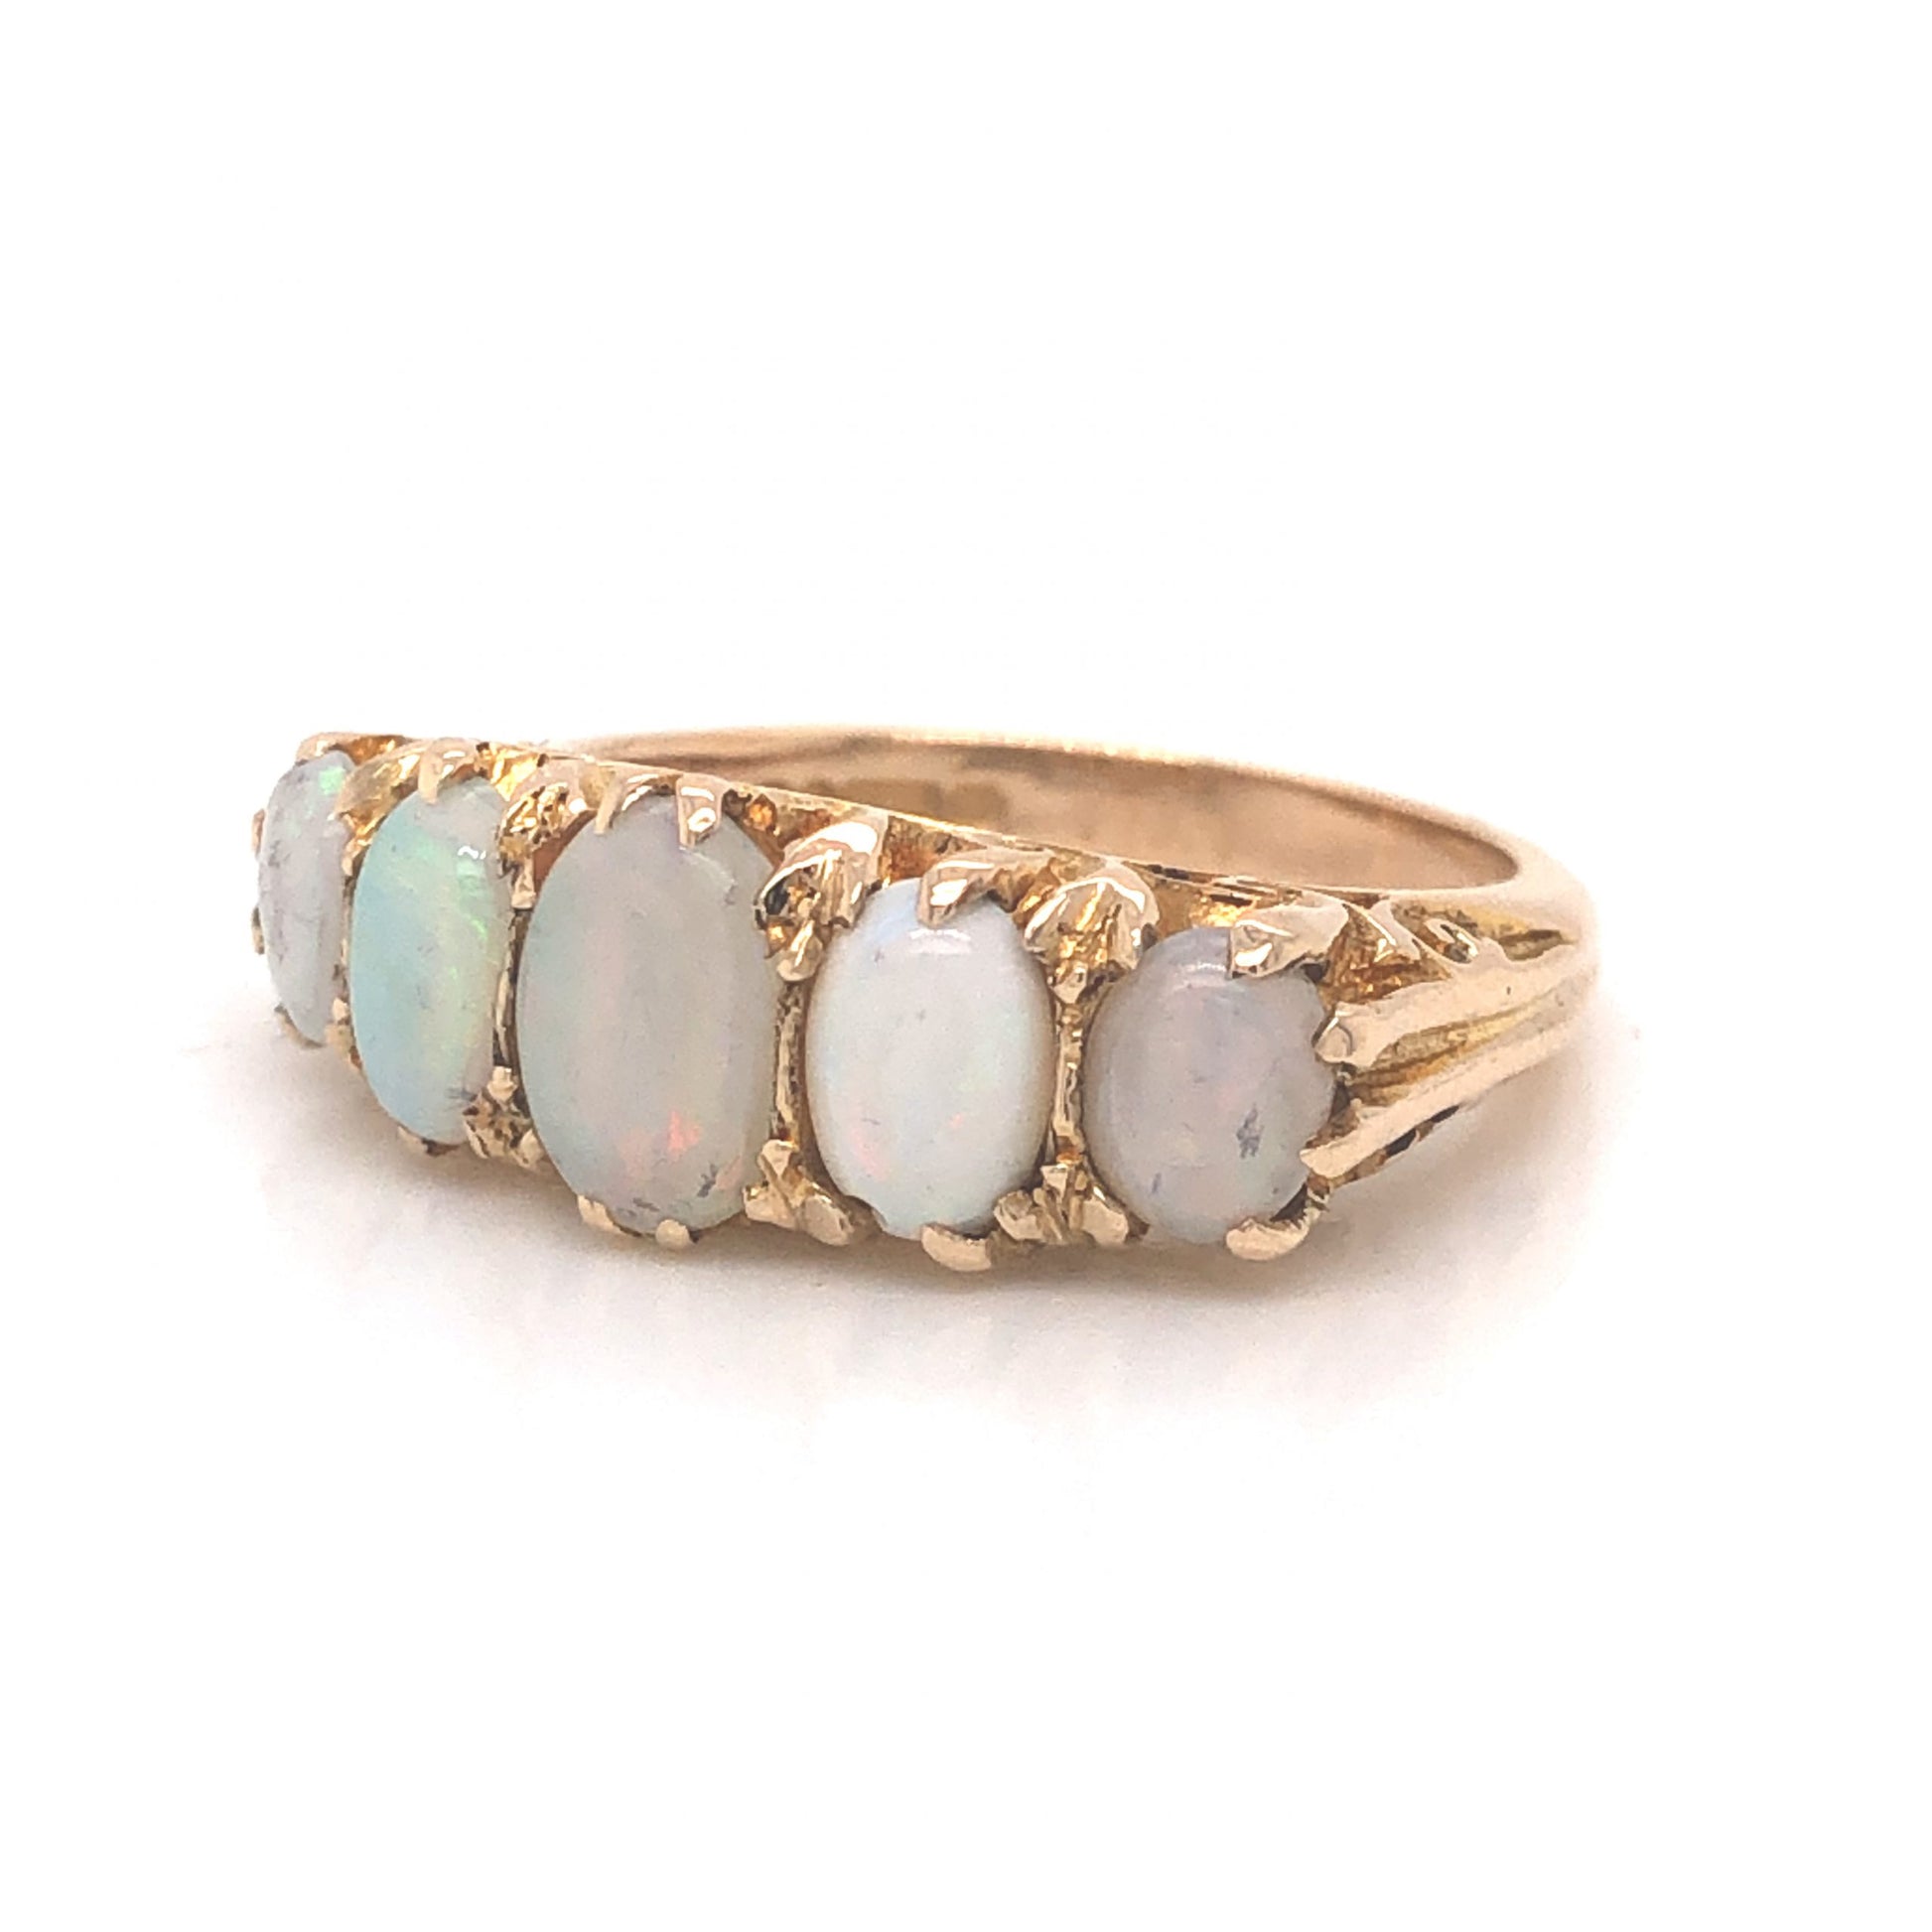 Ornate Victorian Opal Cocktail Ring in 14k Yellow GoldComposition: 14 Karat Yellow Gold Ring Size: 5.75 Total Gram Weight: 5.0 g Inscription: DHJ 14 585
      